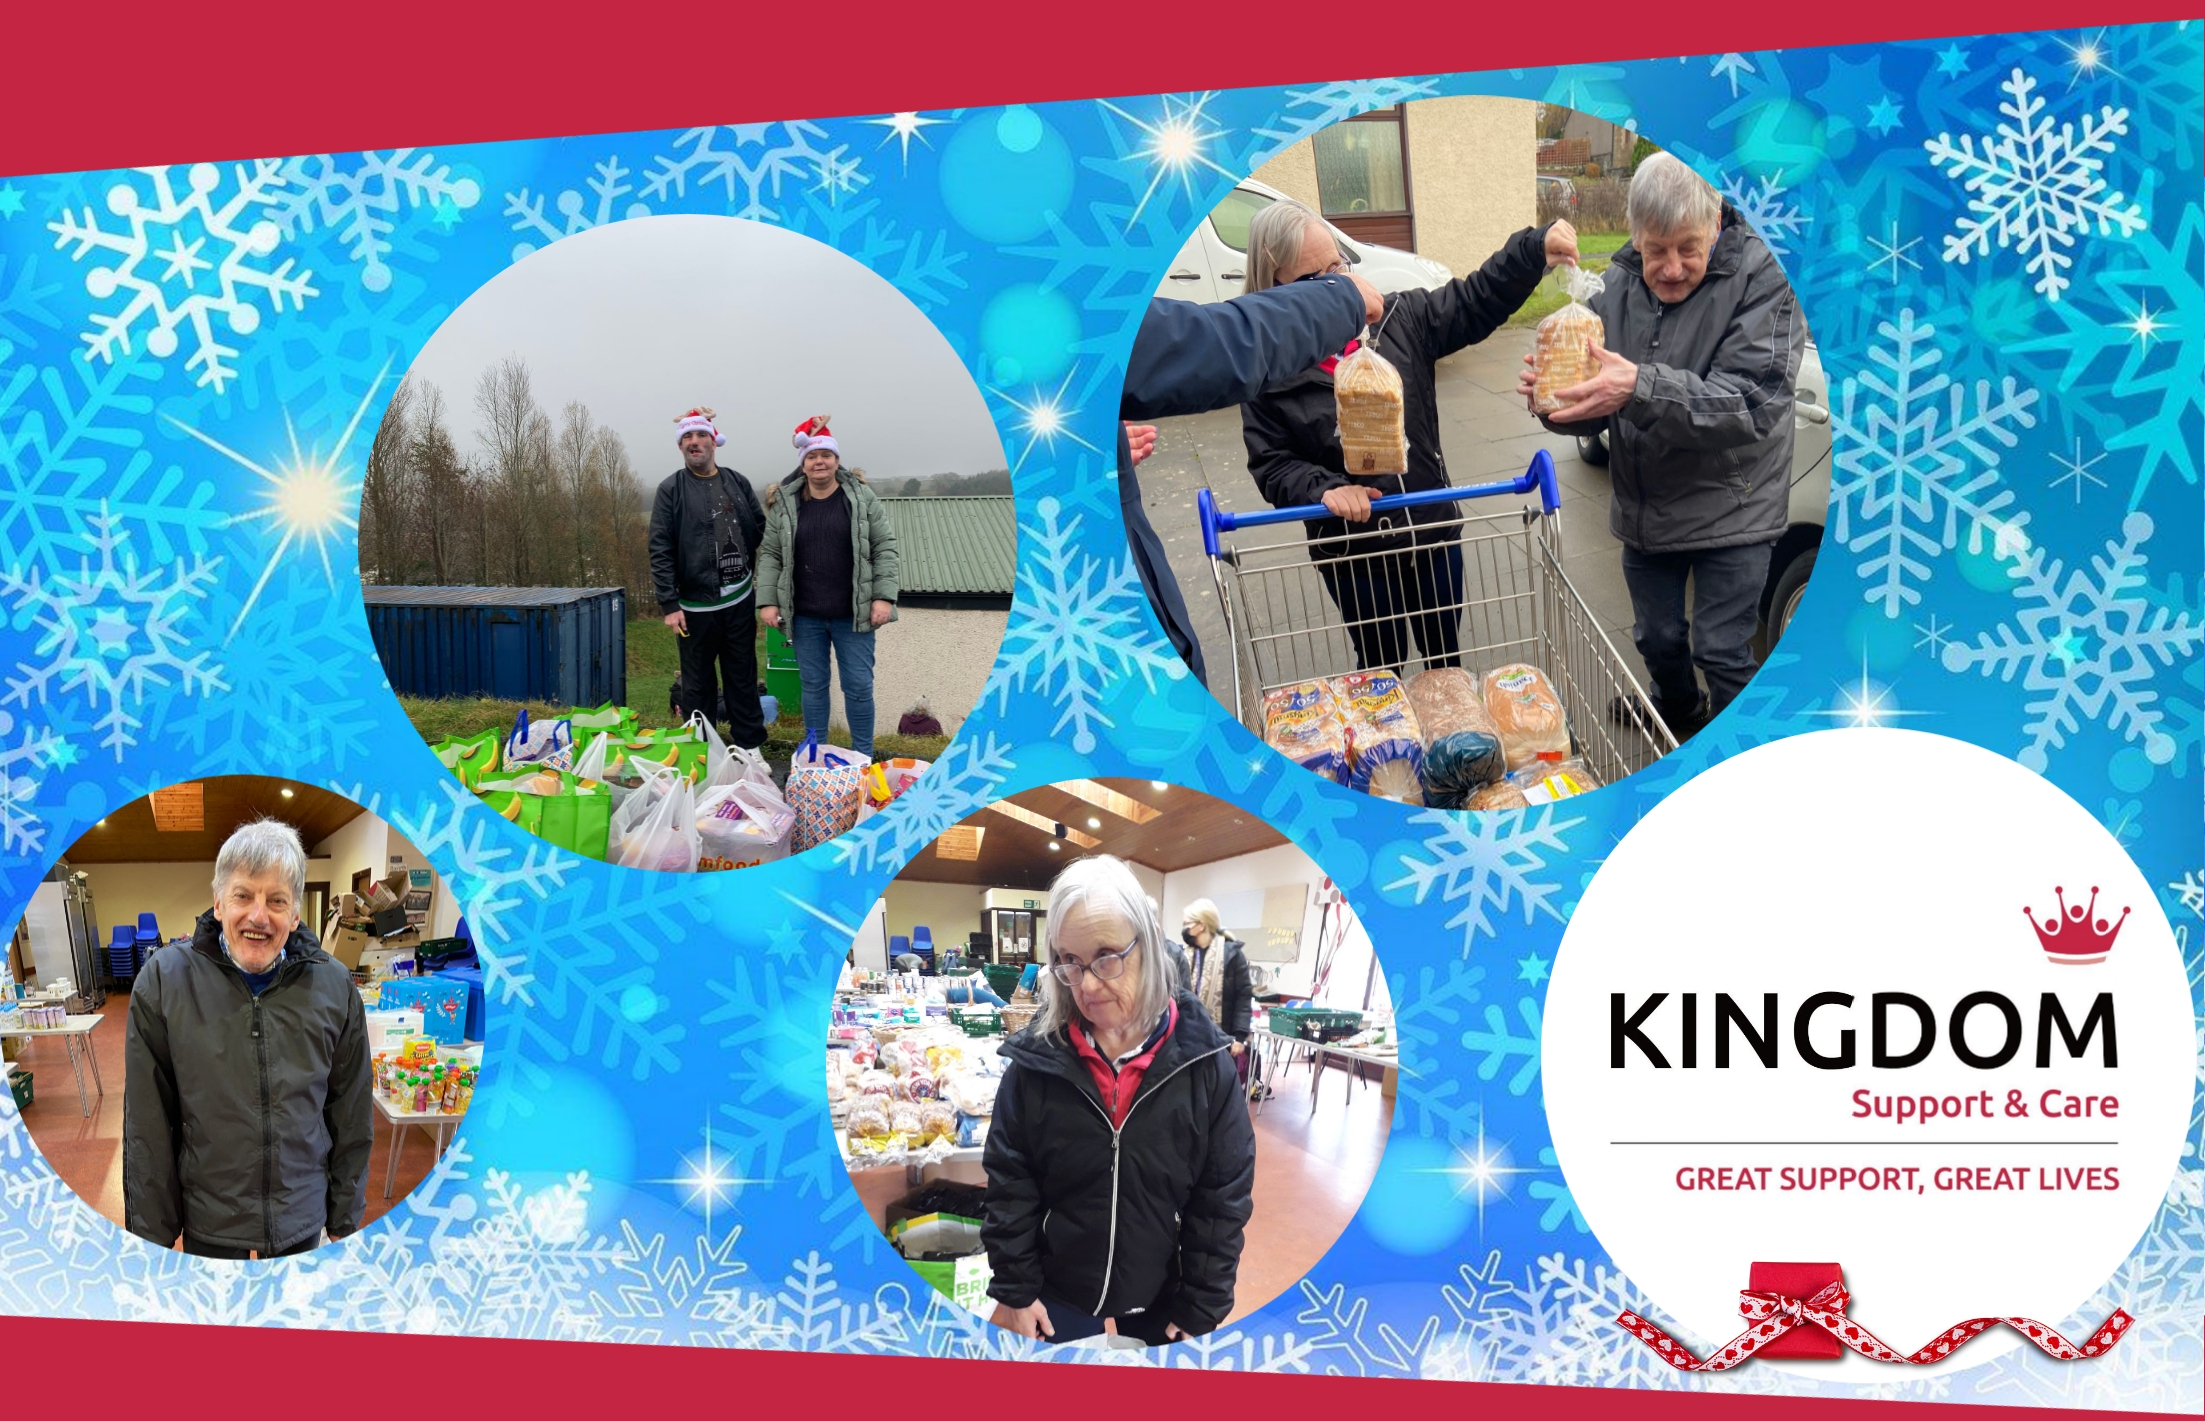 Local charities get festive boost from Kingdom Support & Care